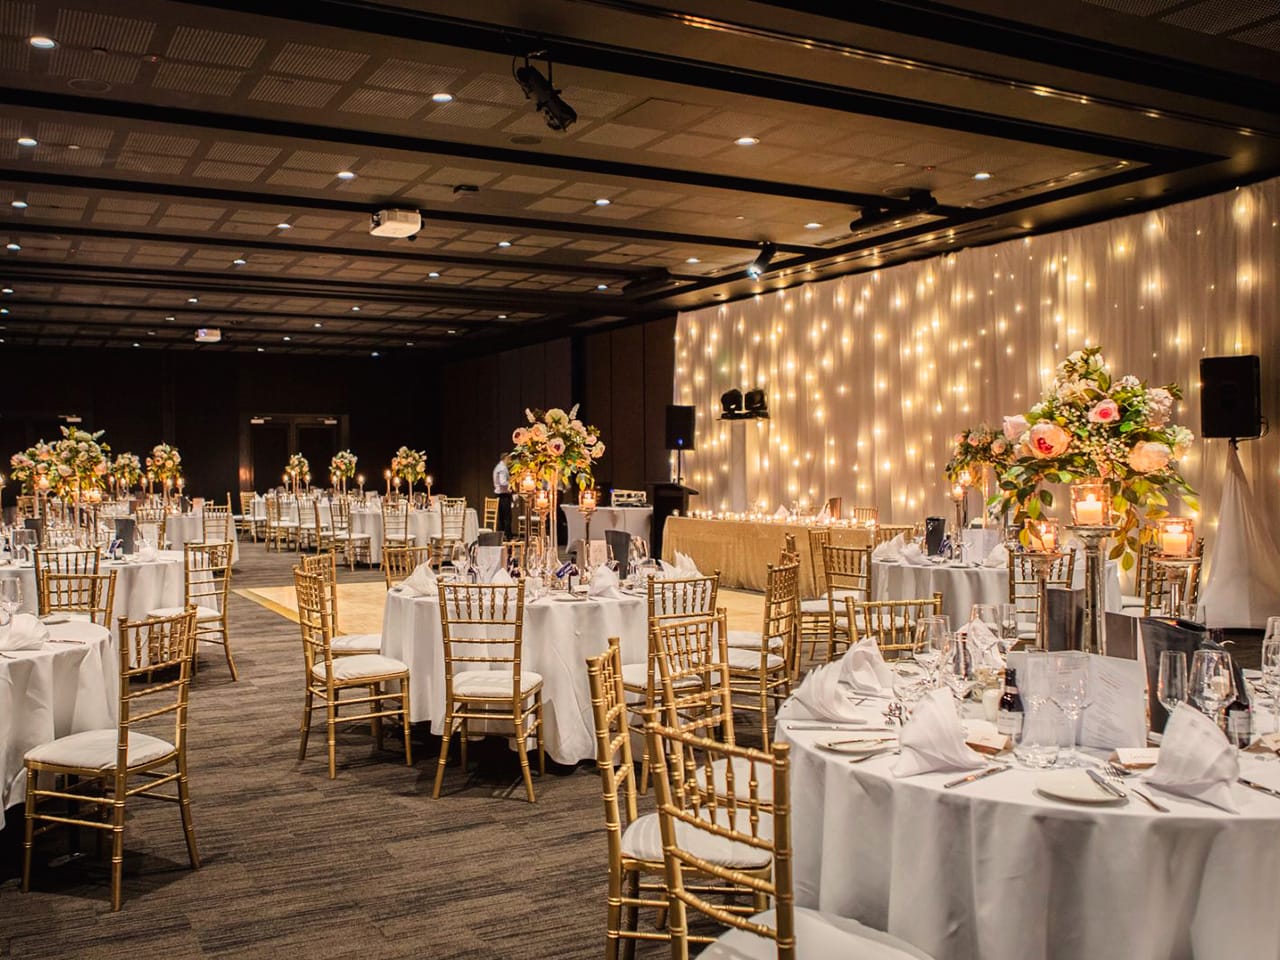 Tables And Chairs In Banquet Style With Flower Centerpieces And String Lights On The Front